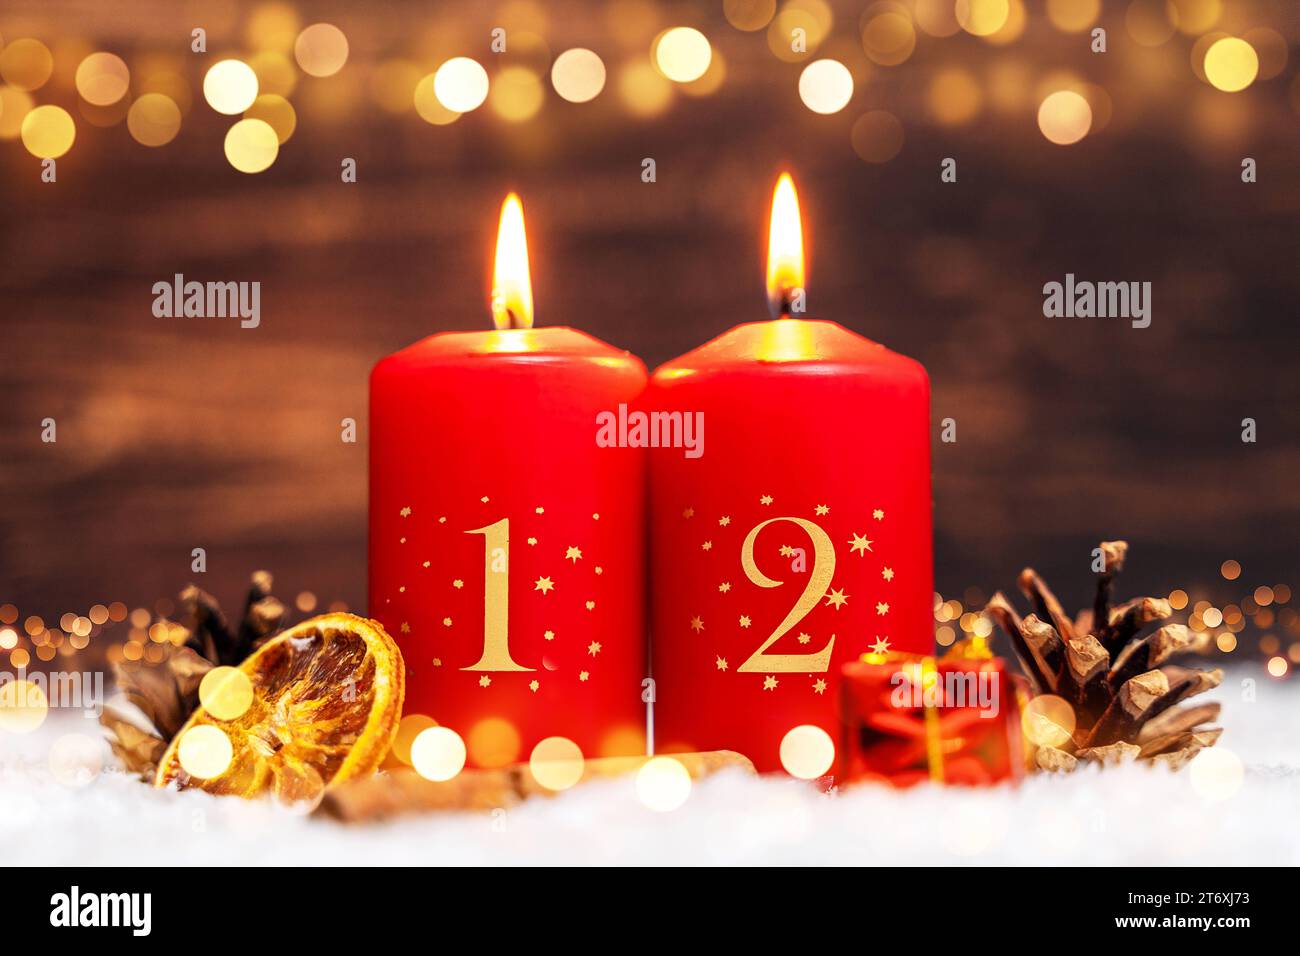 Bavaria, Germany - November 10, 2023: Two festively decorated candles burning for the 2nd Advent surrounded by winter decorations PHOTOMONTAGE *** Zwei festlich dekorierte Kerzen brennen zum 2. Advent umgeben von winterlicher Dekoration FOTOMONTAGE Stock Photo